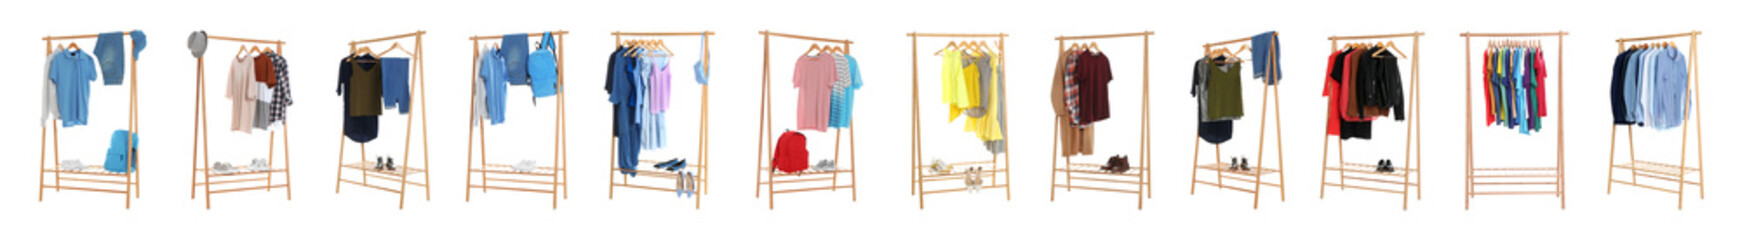 Set of wardrobe racks with different clothes on white background. Banner design